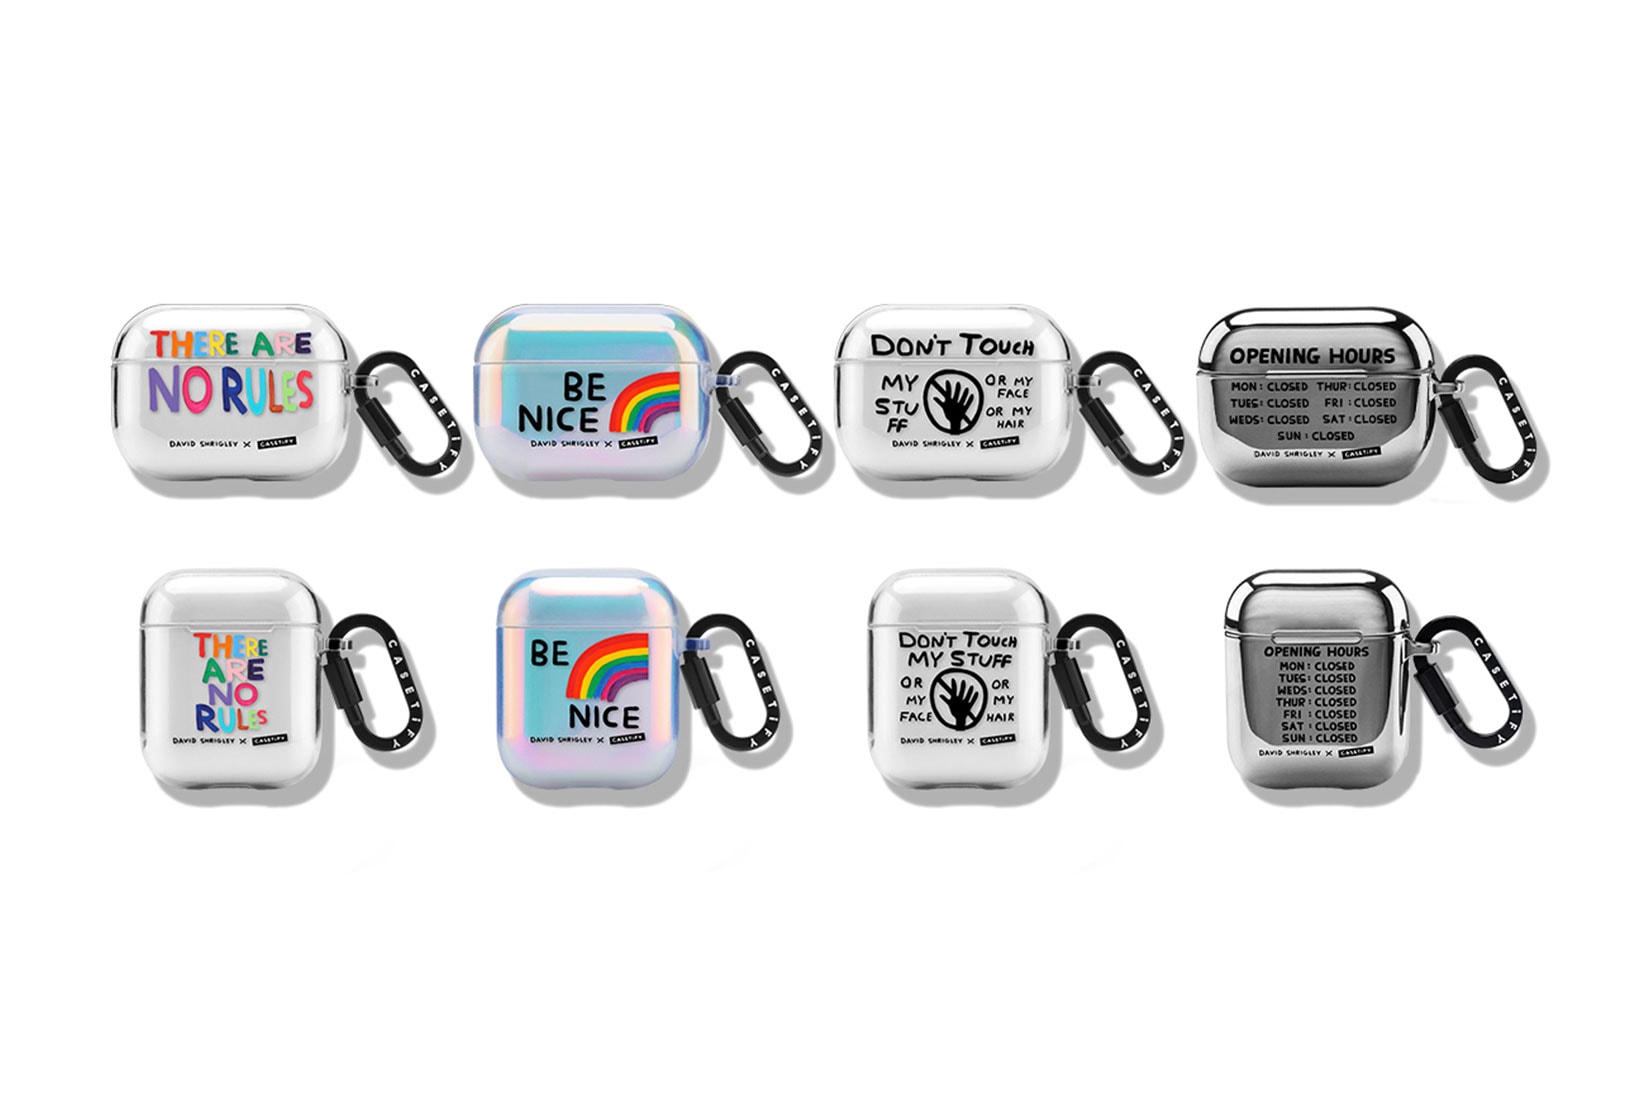 david shrigley casetify collaboration tech accessories airpods pro cases